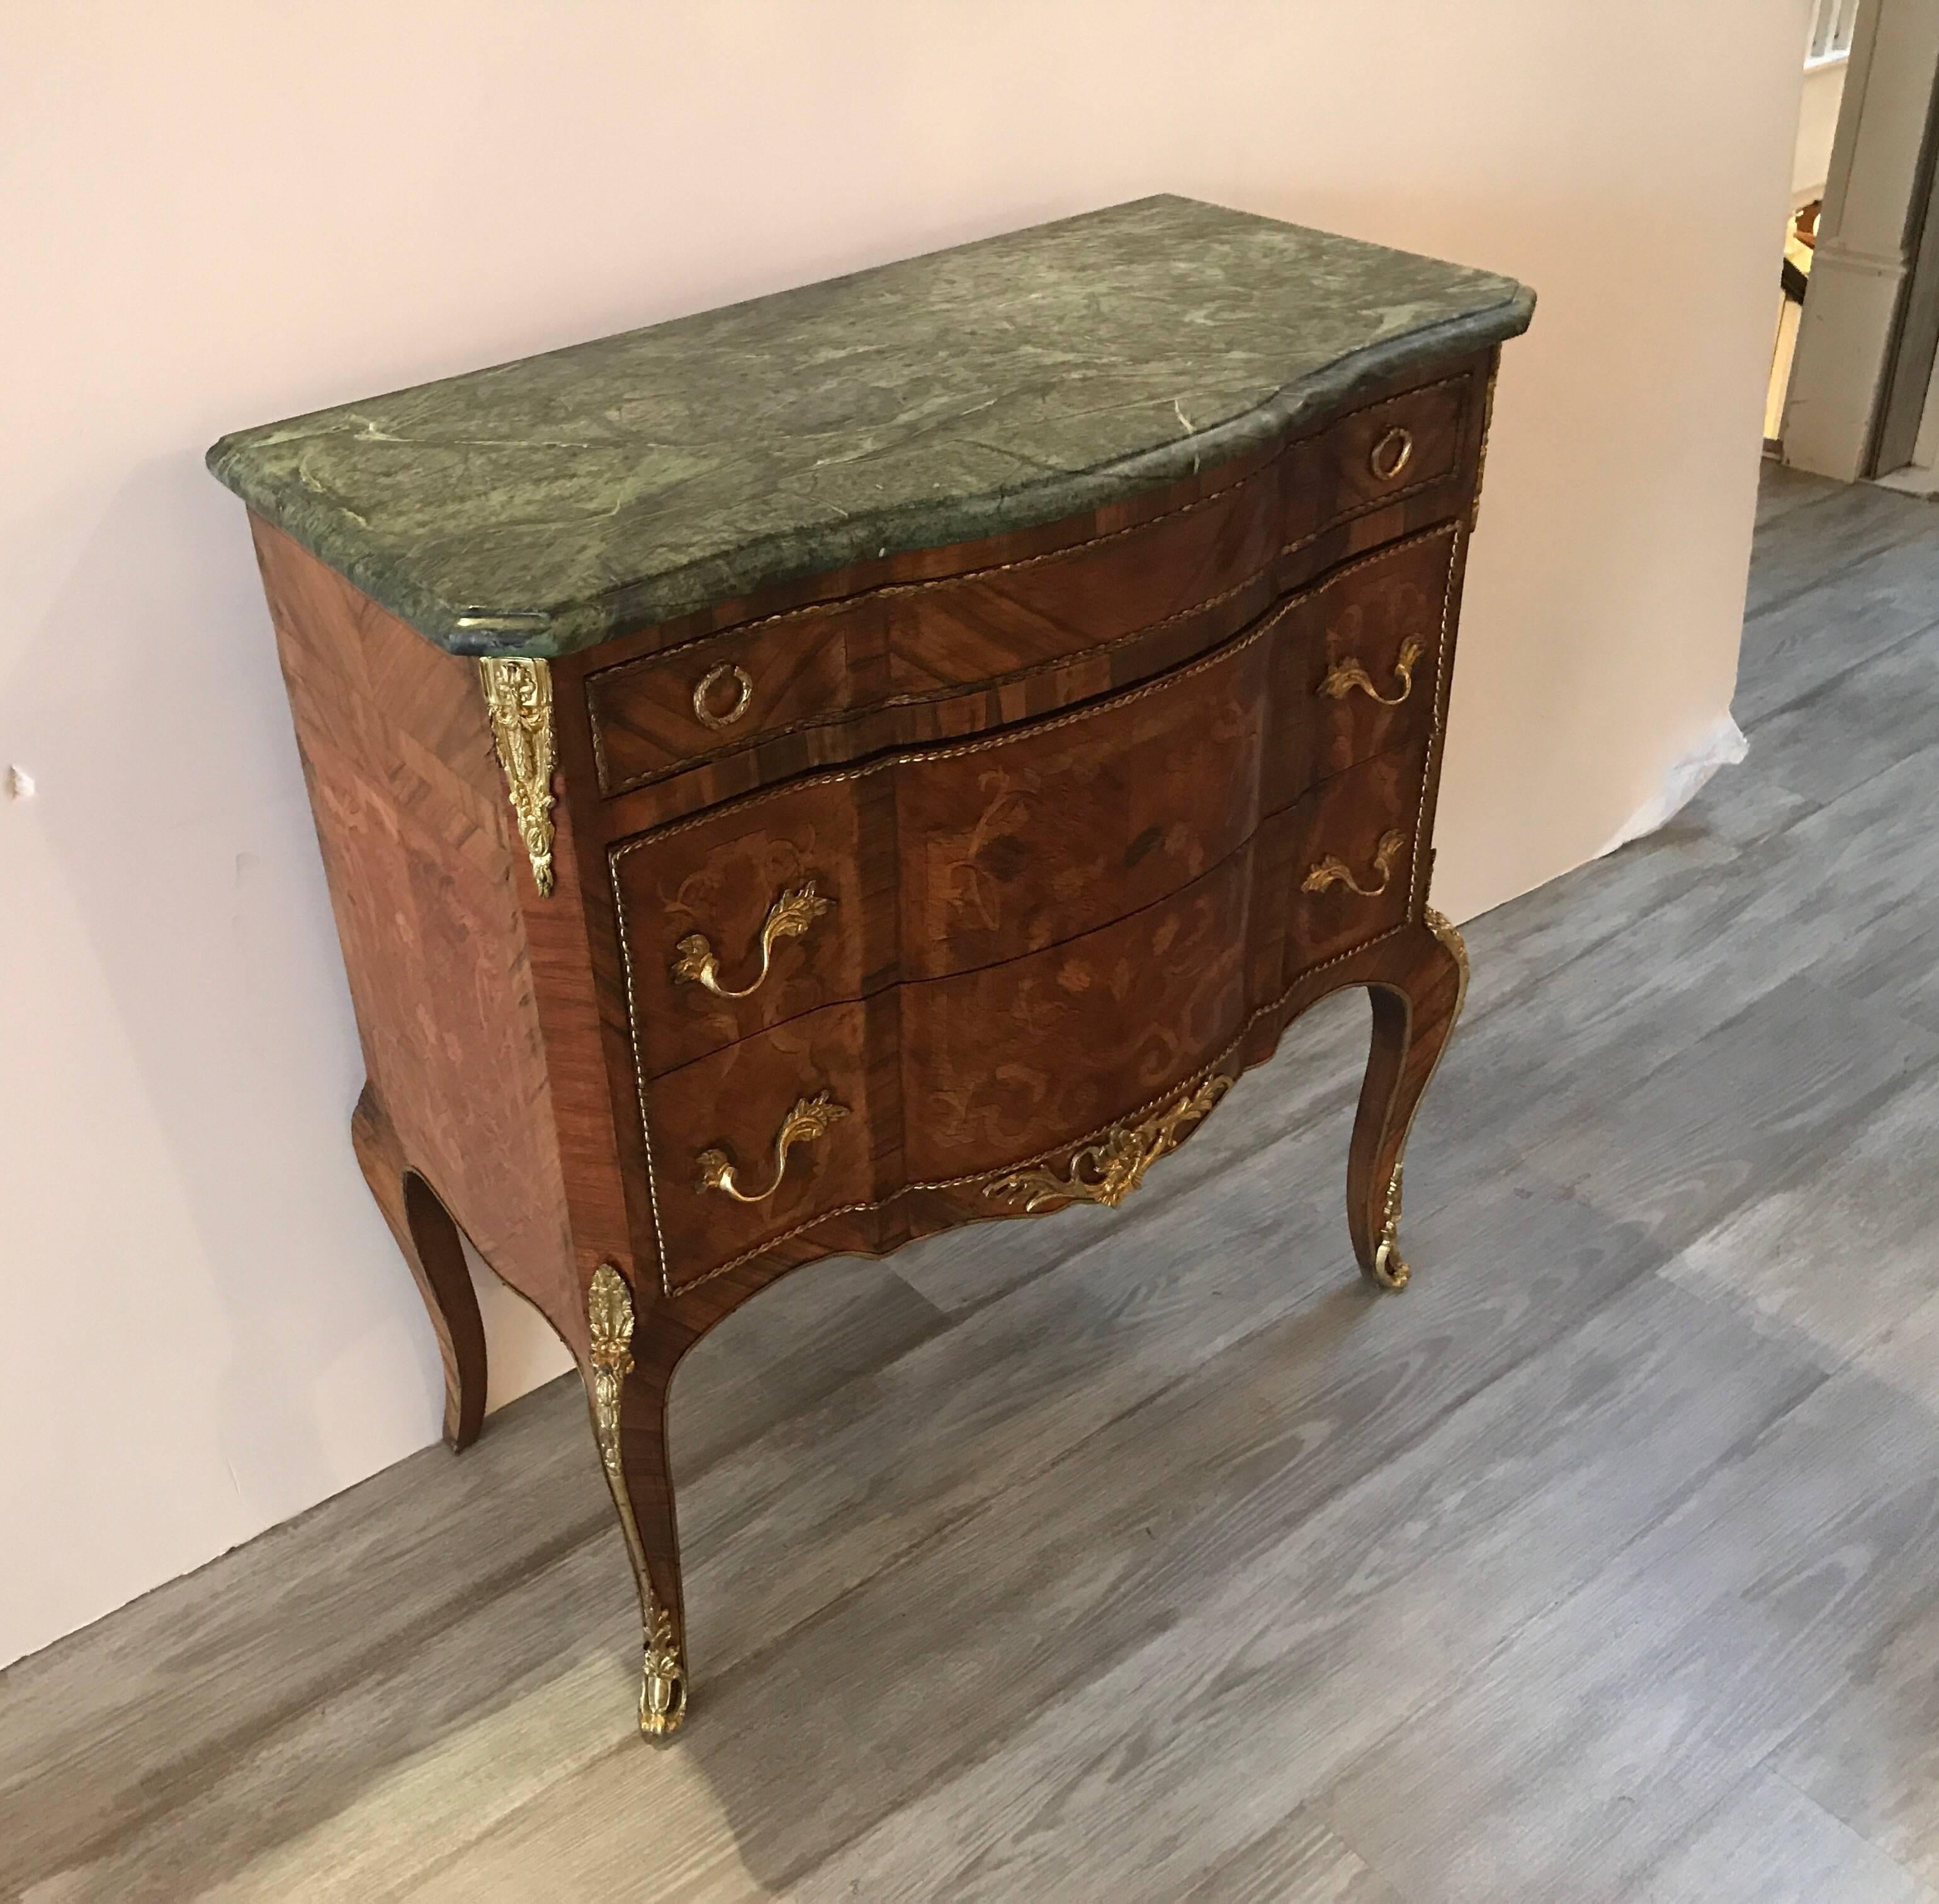 A rare smallish pair of French inlaid commodes with rich olive green marble tops. Three drawers with inlaid fronts of kings wood and tulip wood. The commodes are 29 inches wide and perfect as side accent chests or nightstands.